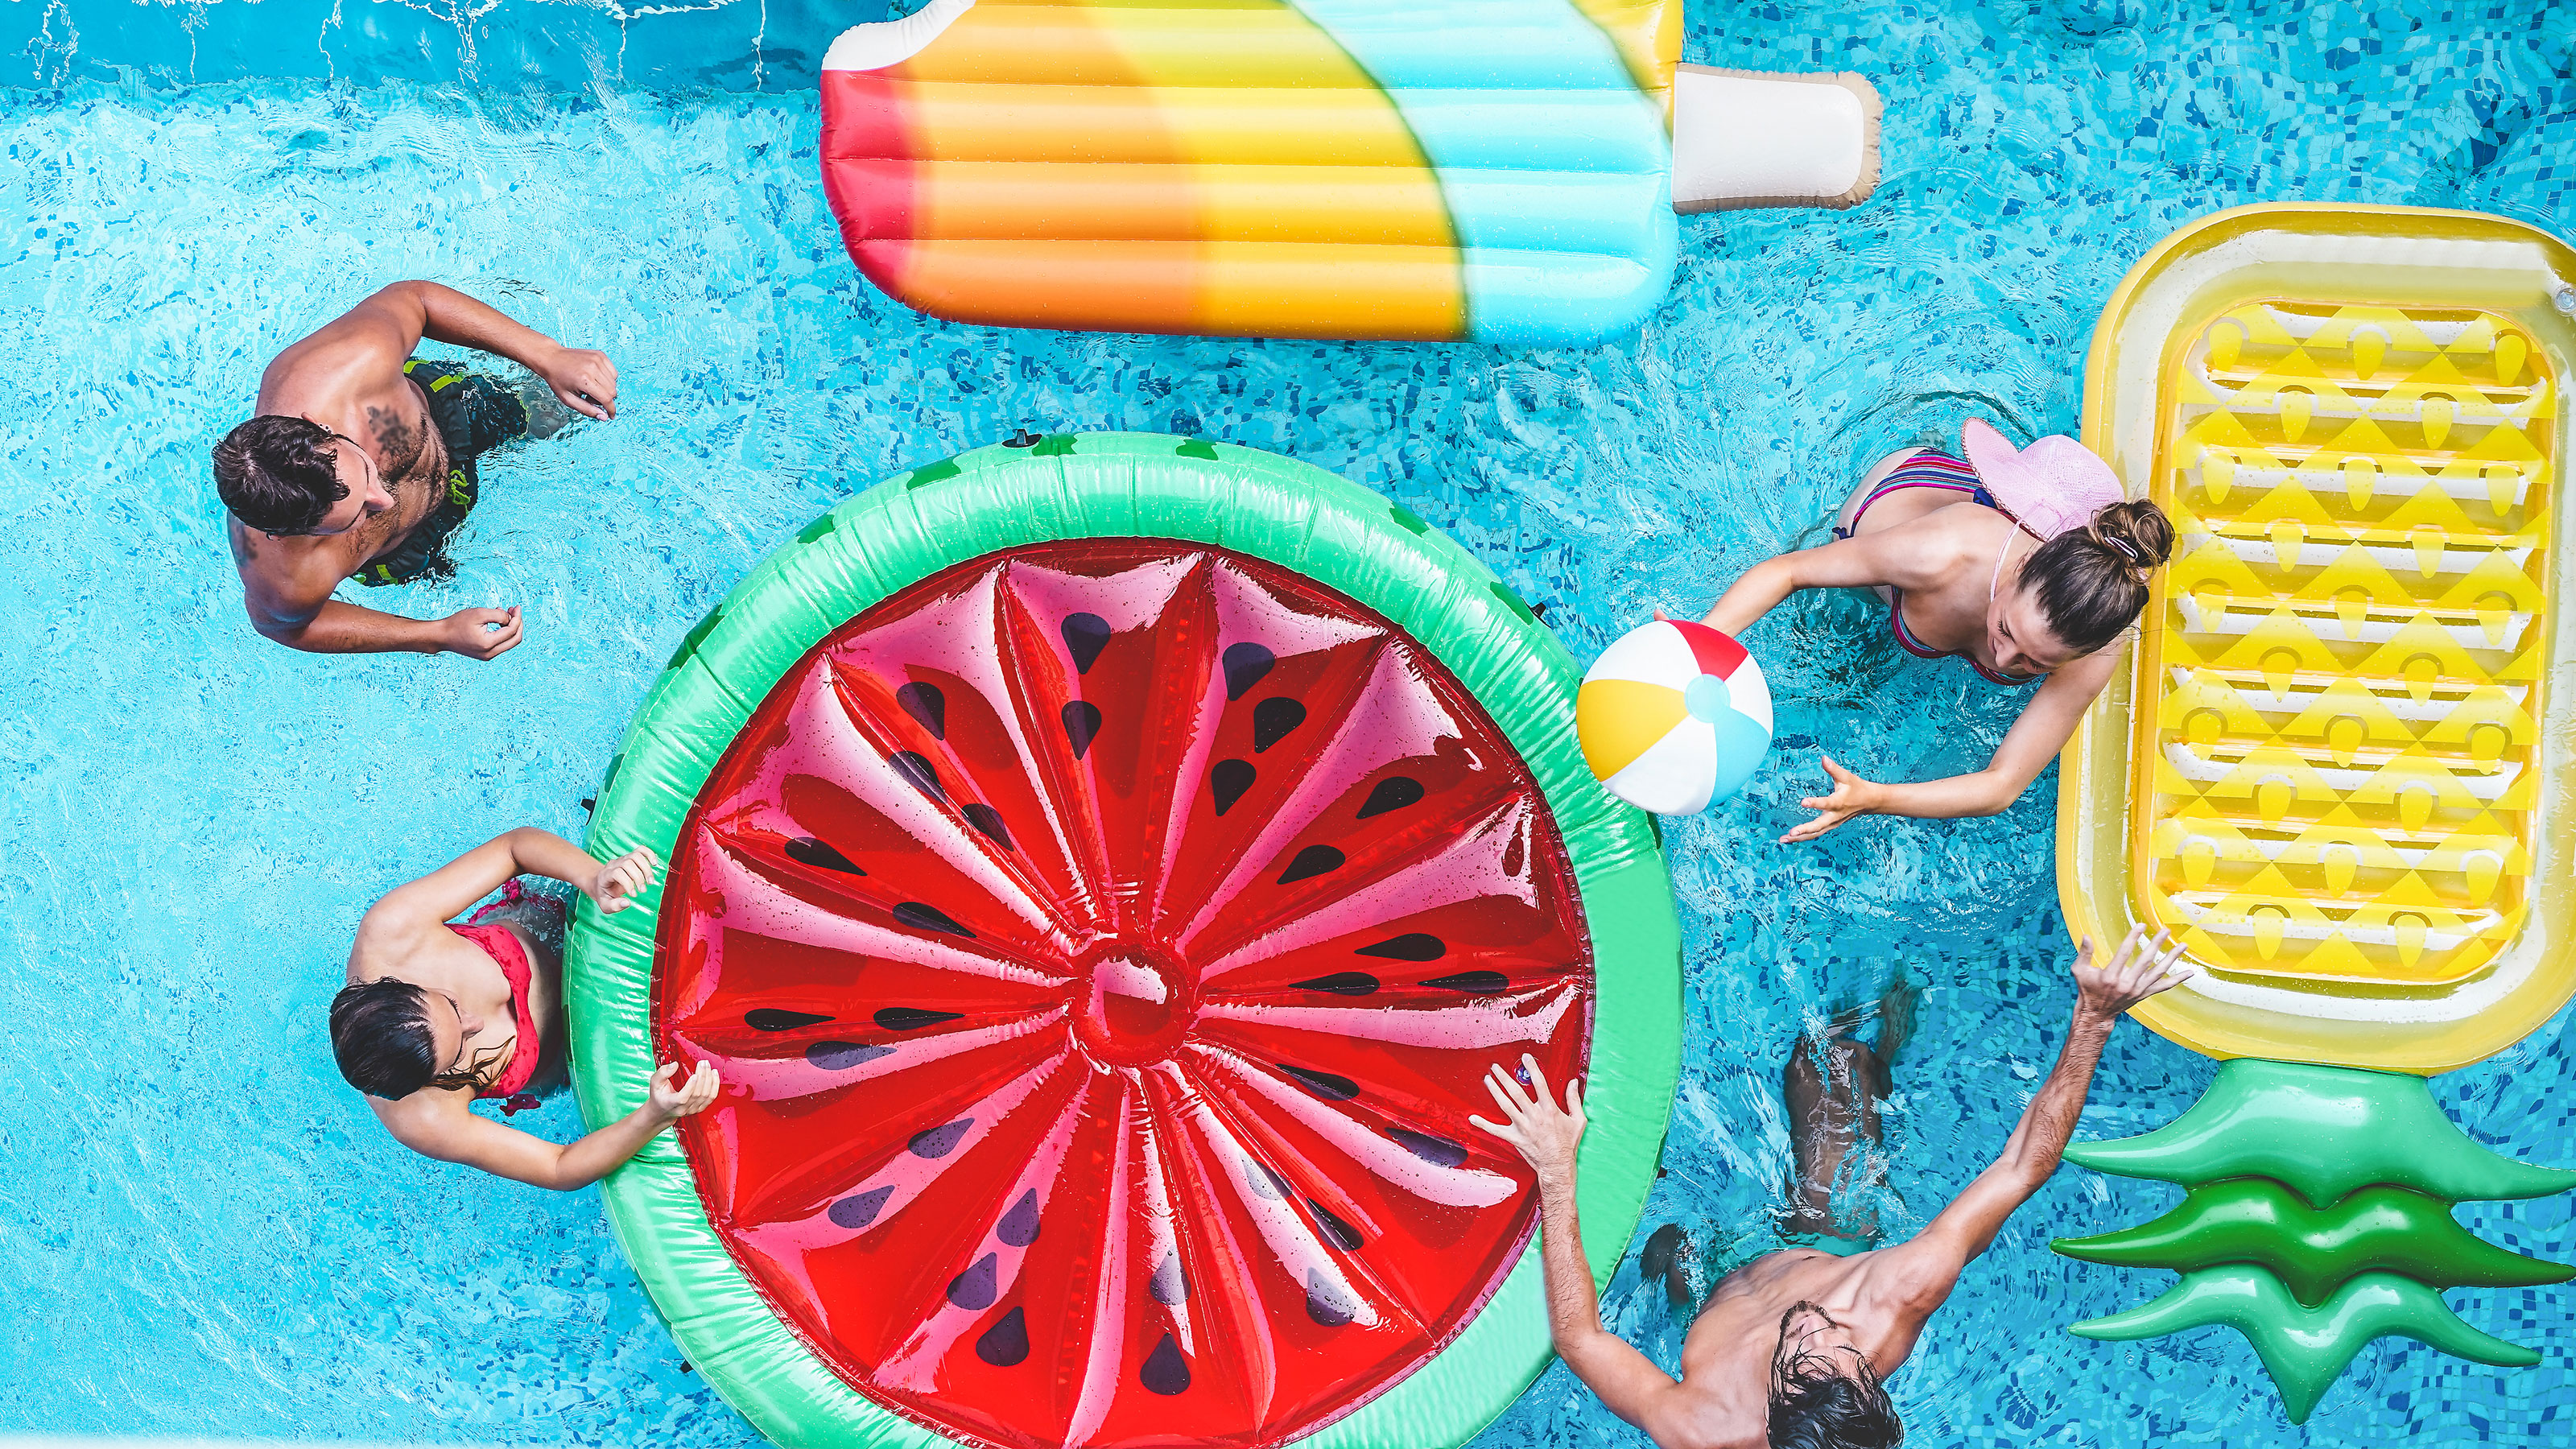 How To Throw The Perfect Pool Party